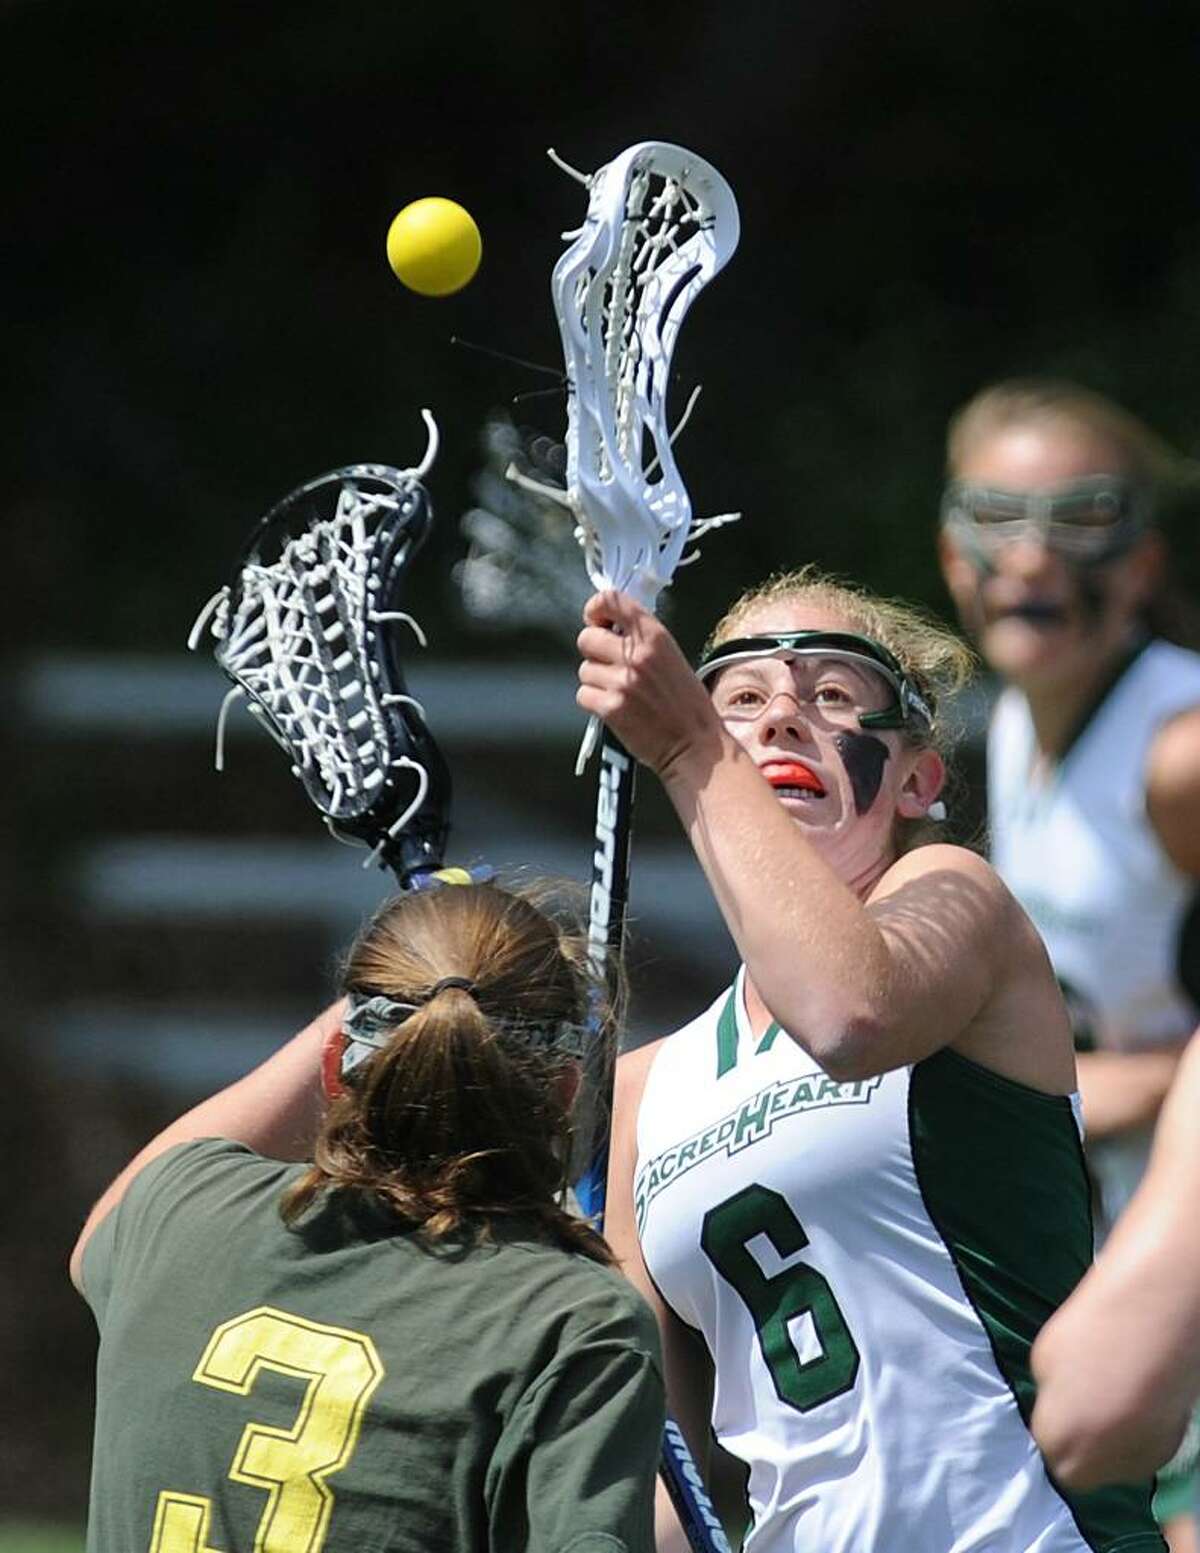 Tory Bensen, # 6 of Convent of the Sacred Heart, right faces-off against Alexa Pujol, # 3, of Greenwich Academy, during lst half action at GA, Saturday. GA defeated CSH, 19-15.